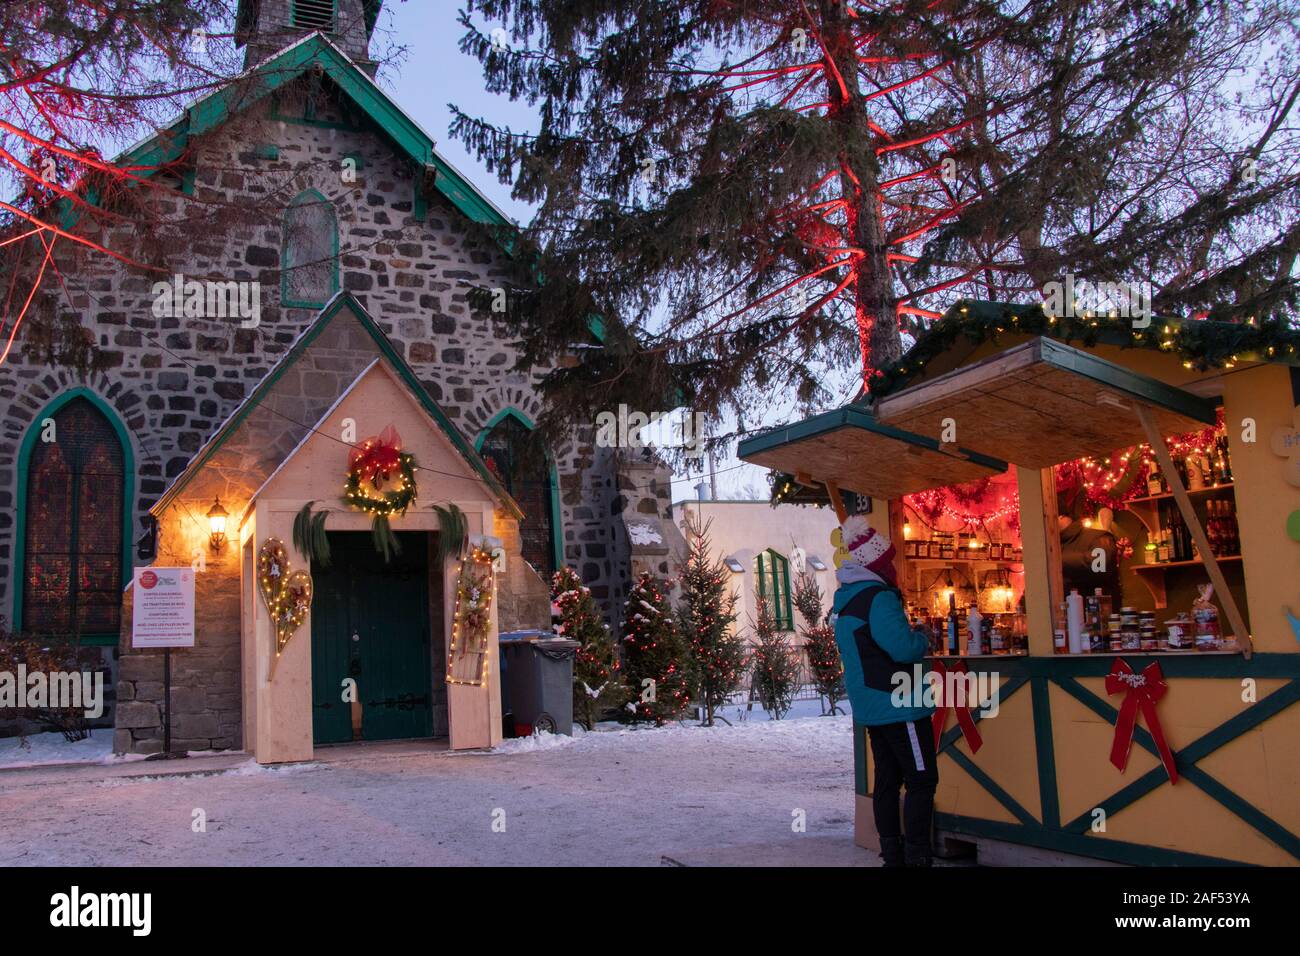 Longueuil, Québec, Canada - December 7, 2019: Christmas Market Stand in front St Mark's Anglican Church, Montérégie winter festival Stock Photo